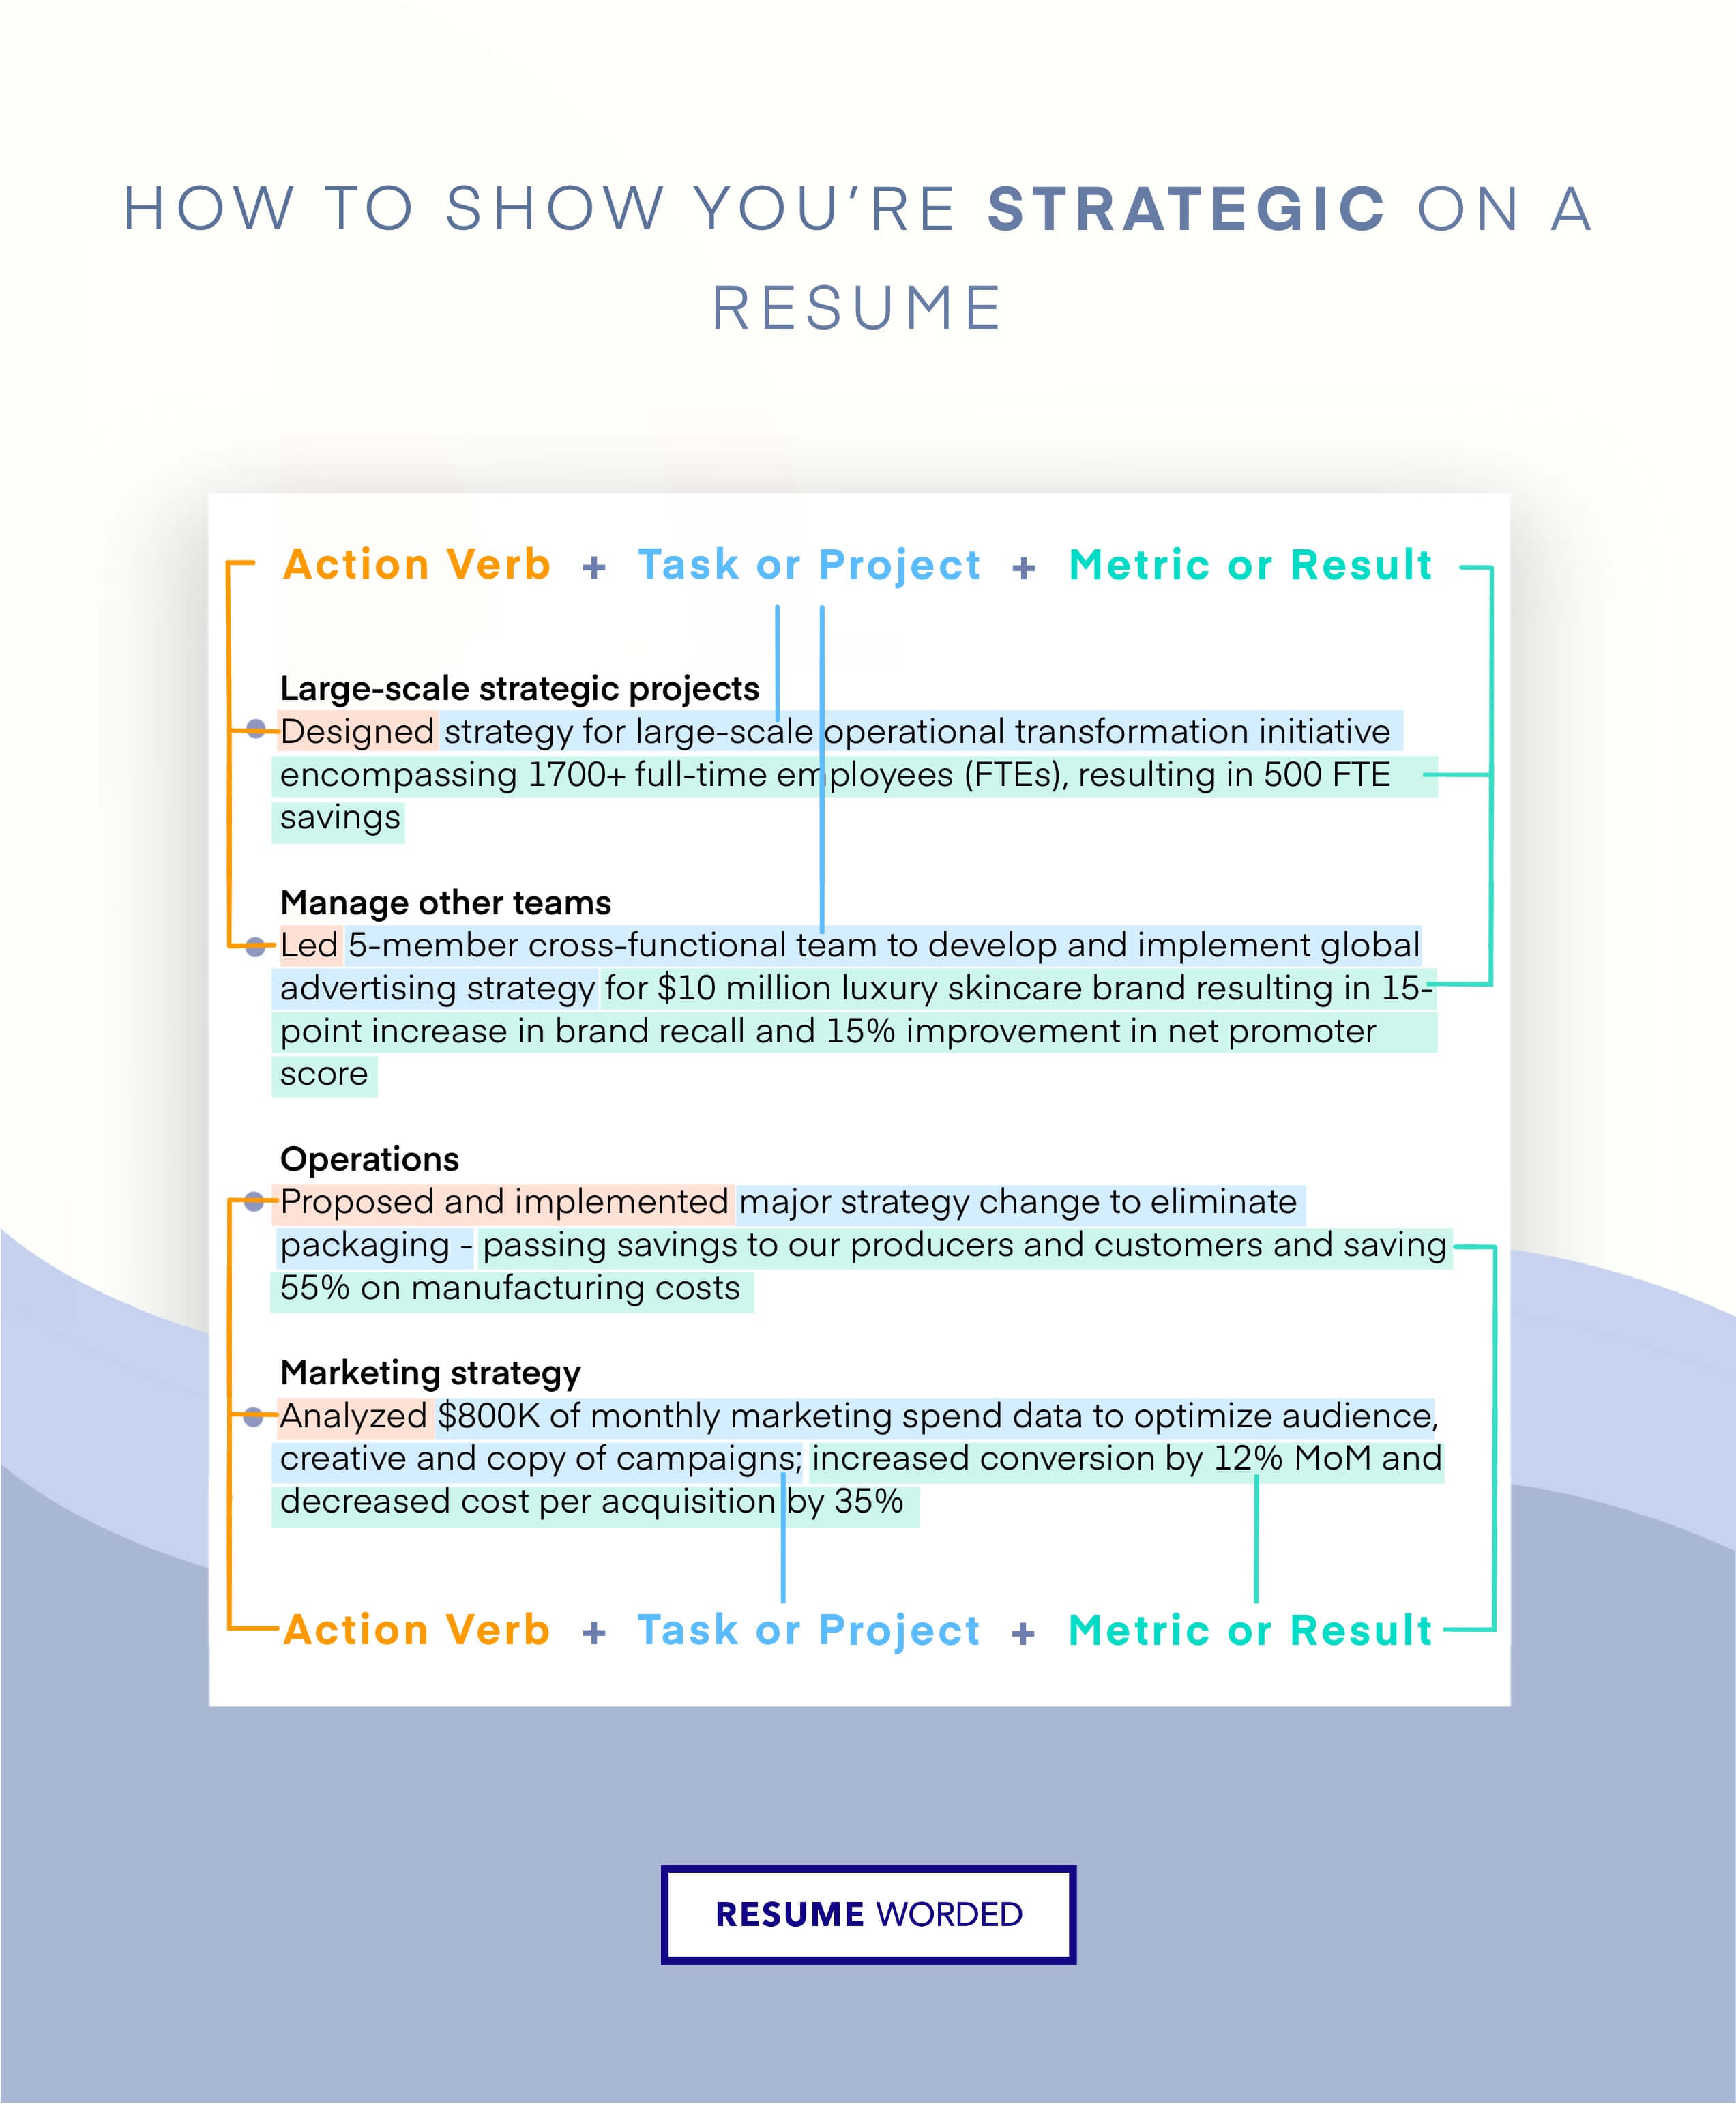 Highlight your Content Strategy Expertise - Digital Marketing Manager CV